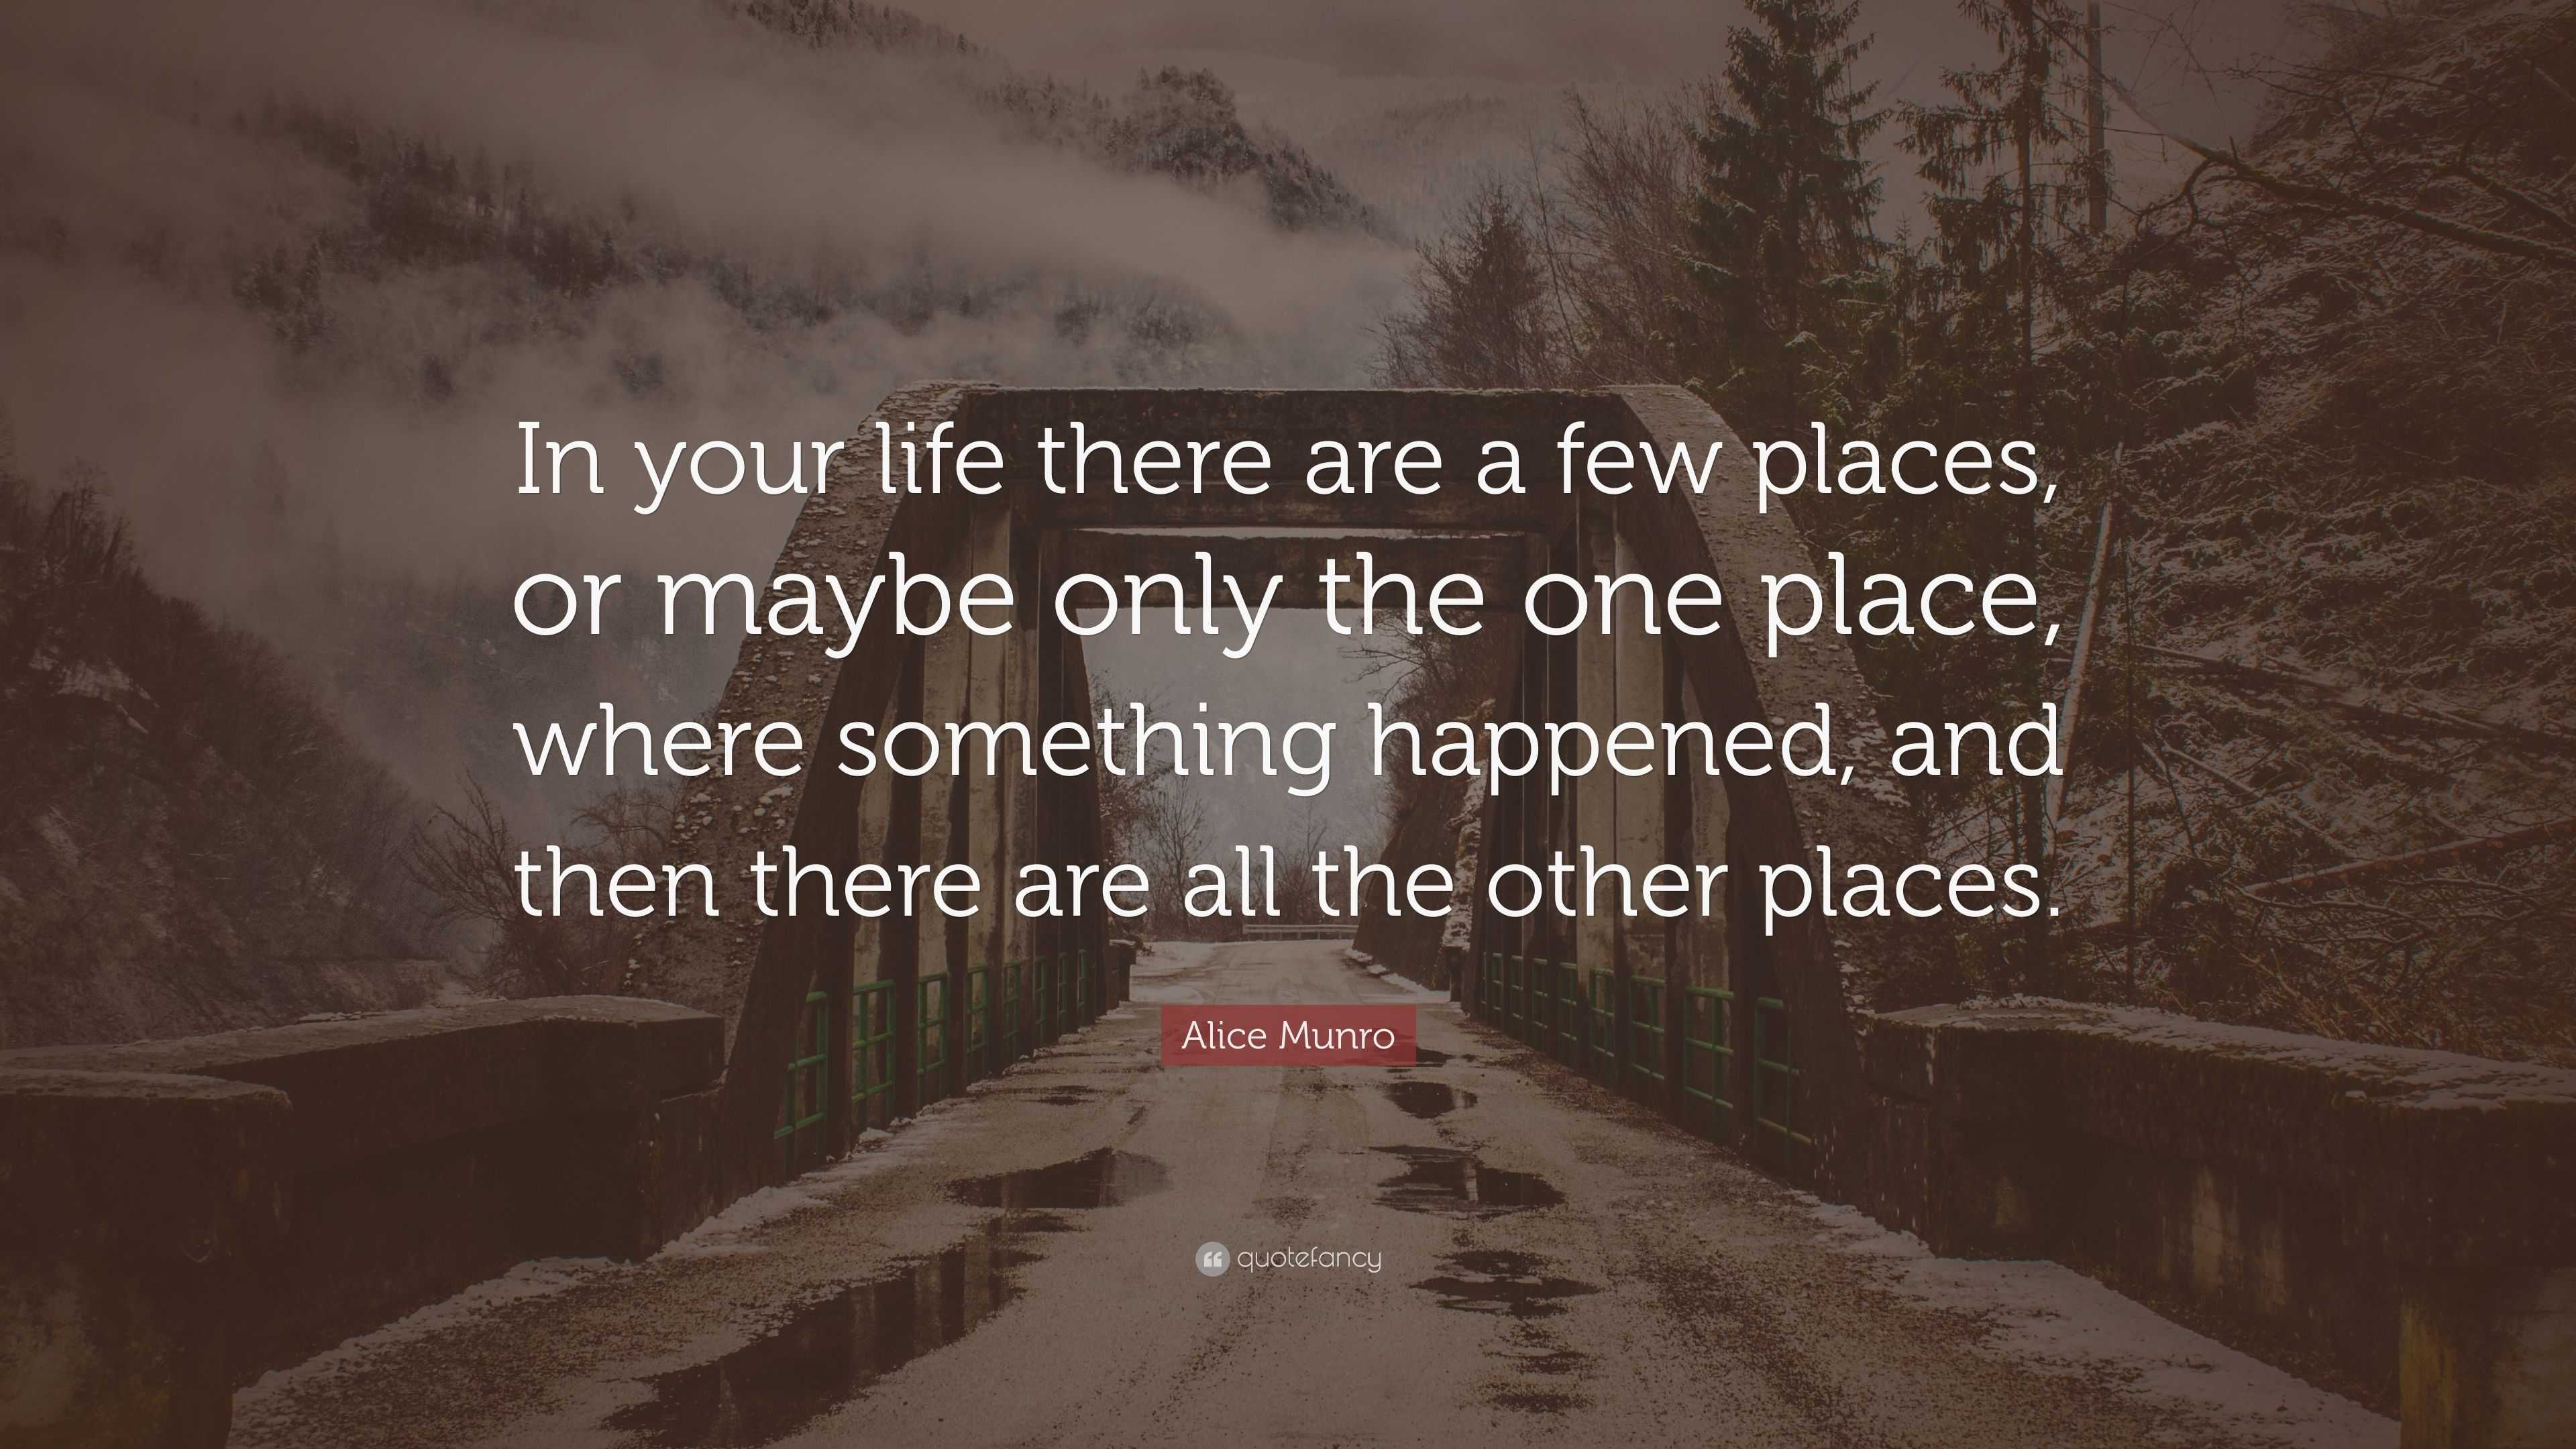 Alice Munro Quote: “In your life there are a few places, or maybe only ...